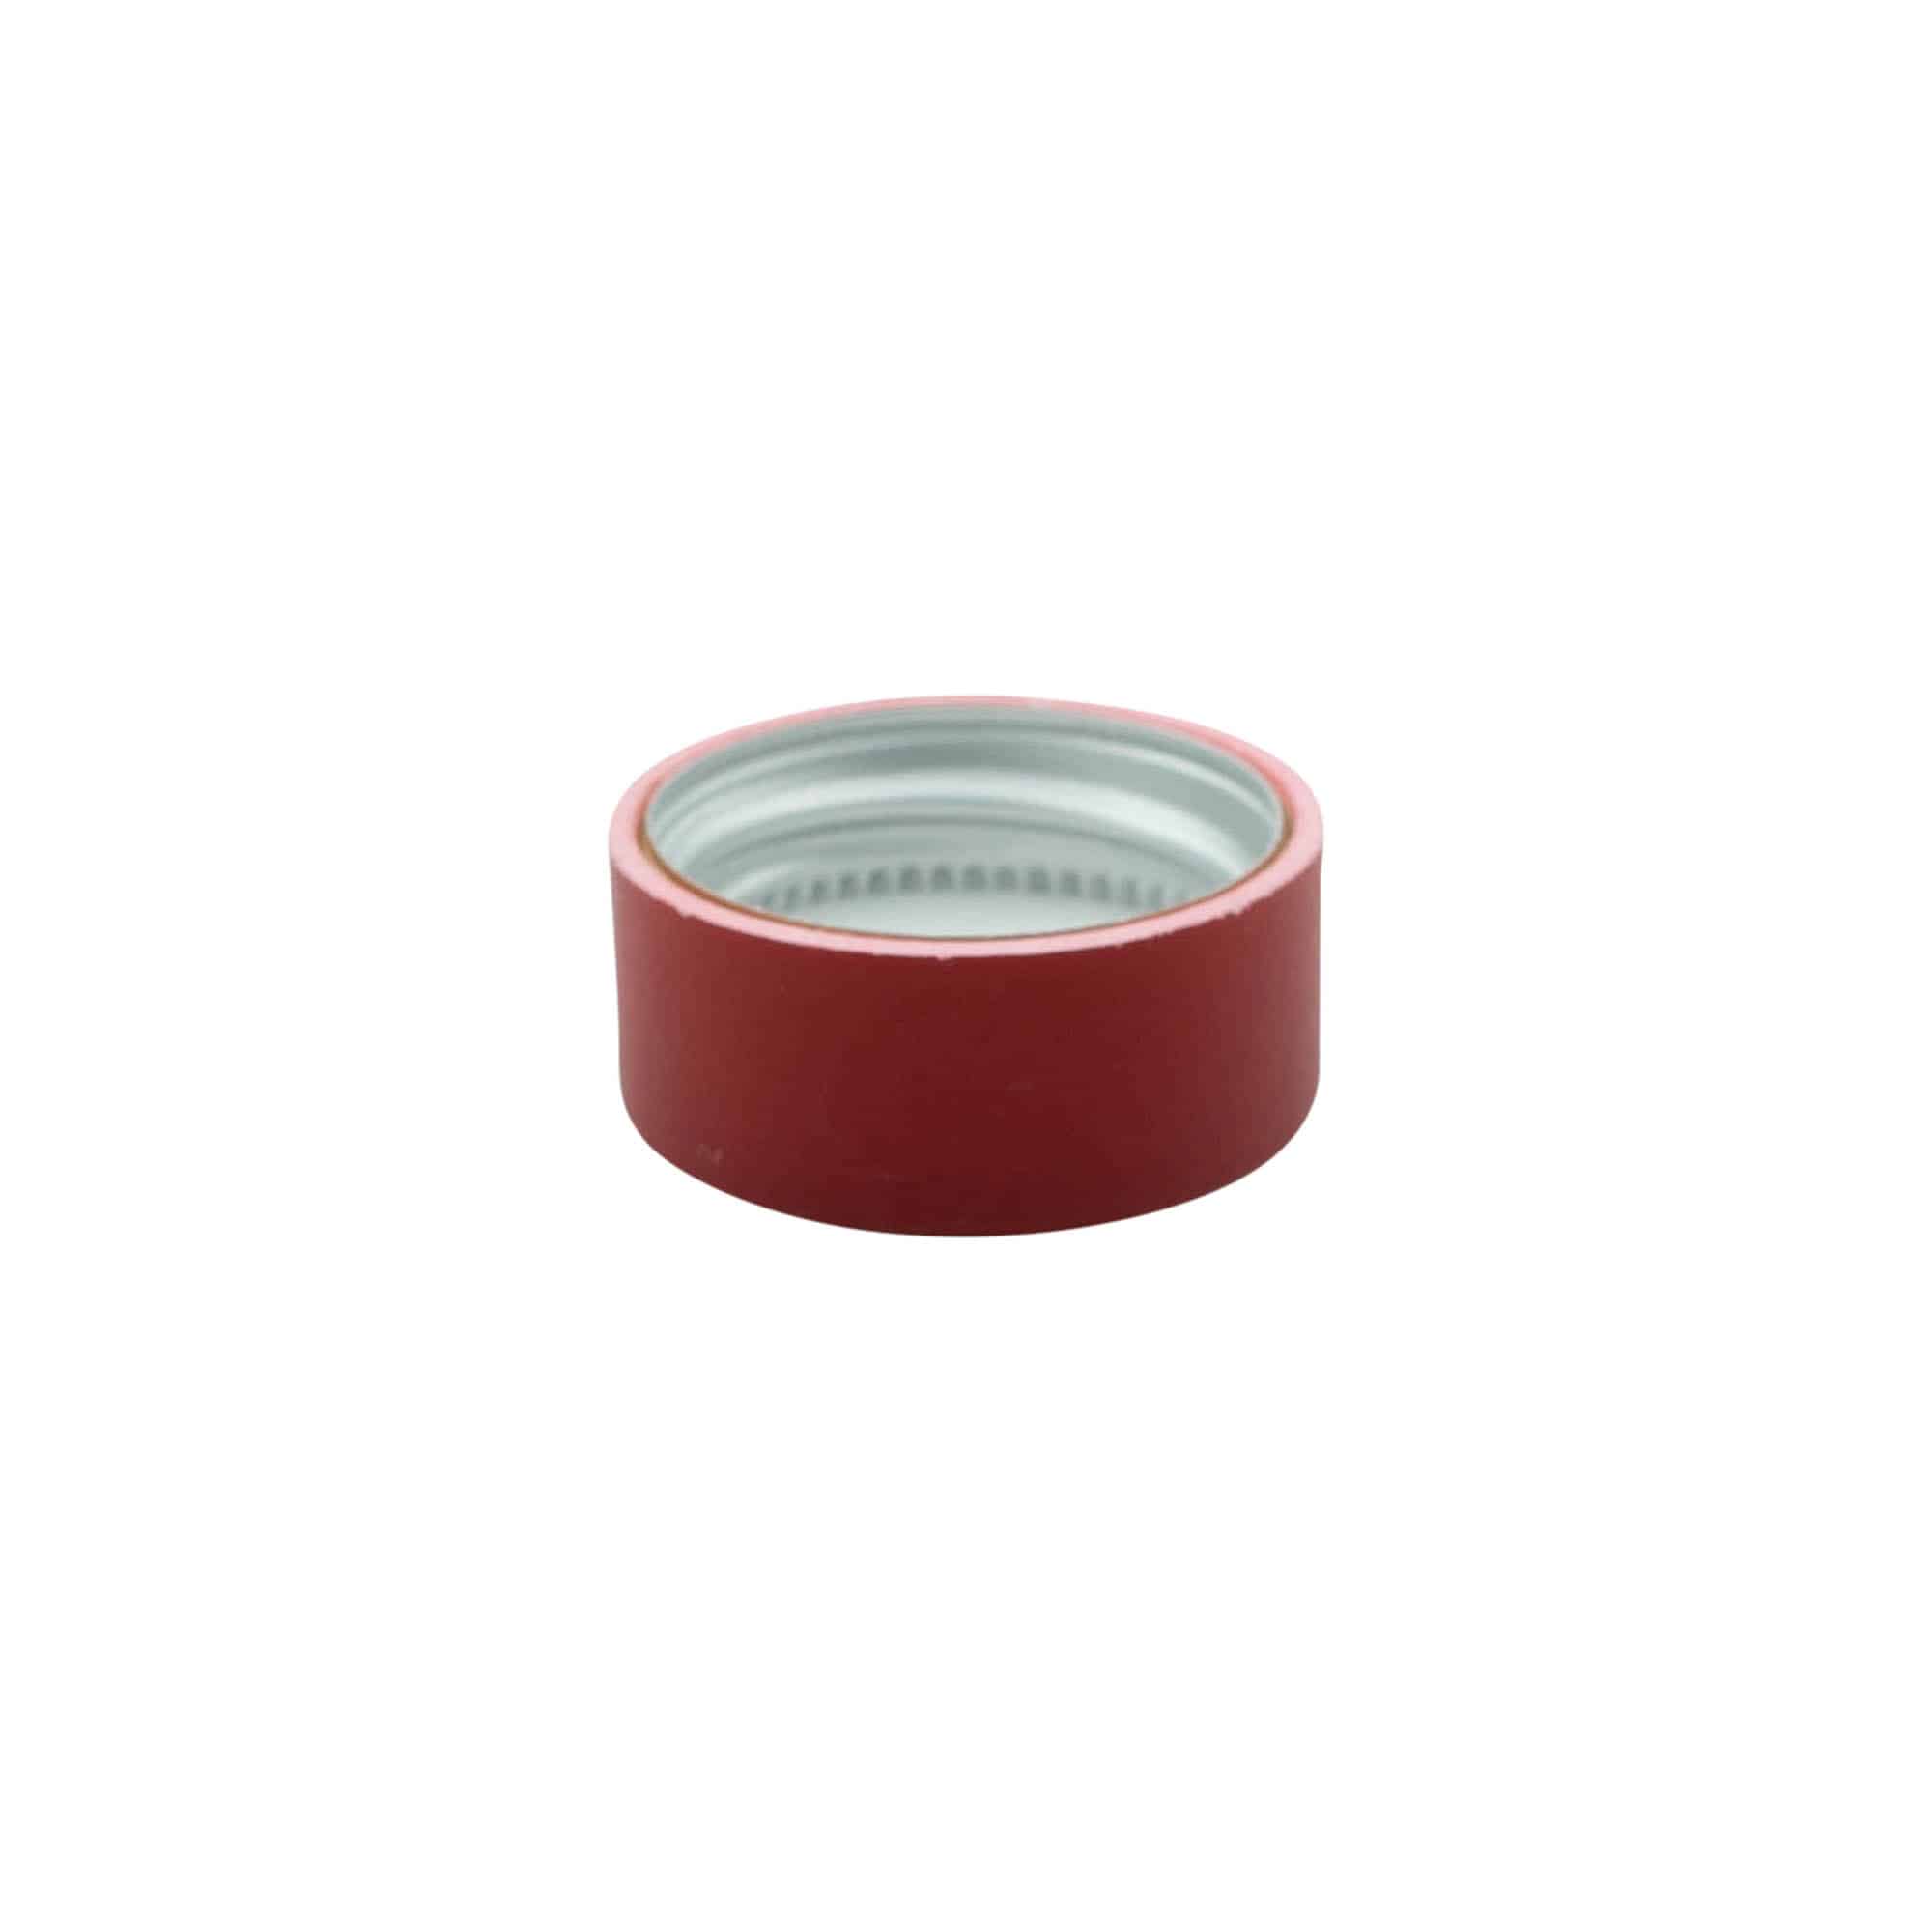 Screw cap, ABS plastic, red, for opening: GPI 28/400